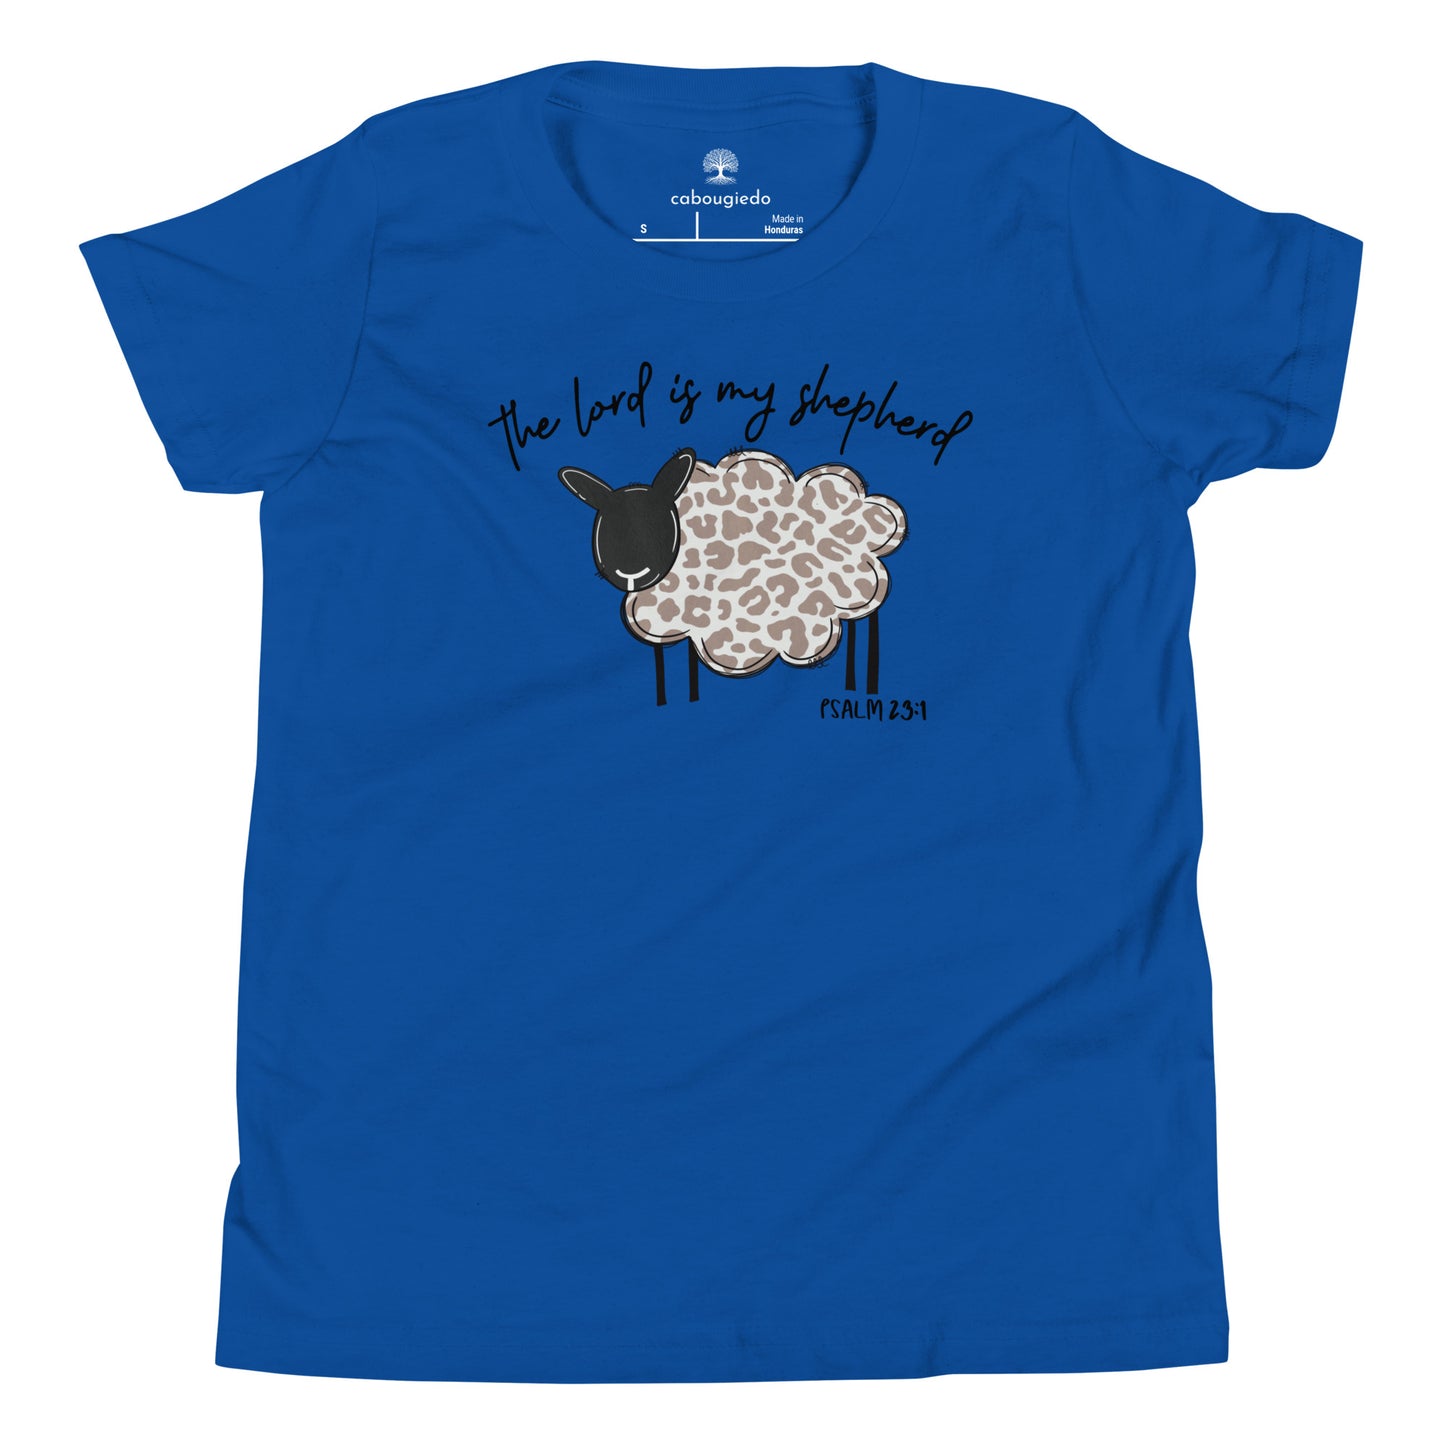 Youth Short Sleeve T-Shirt - The Lord is My Shepherd Psalms 25:1